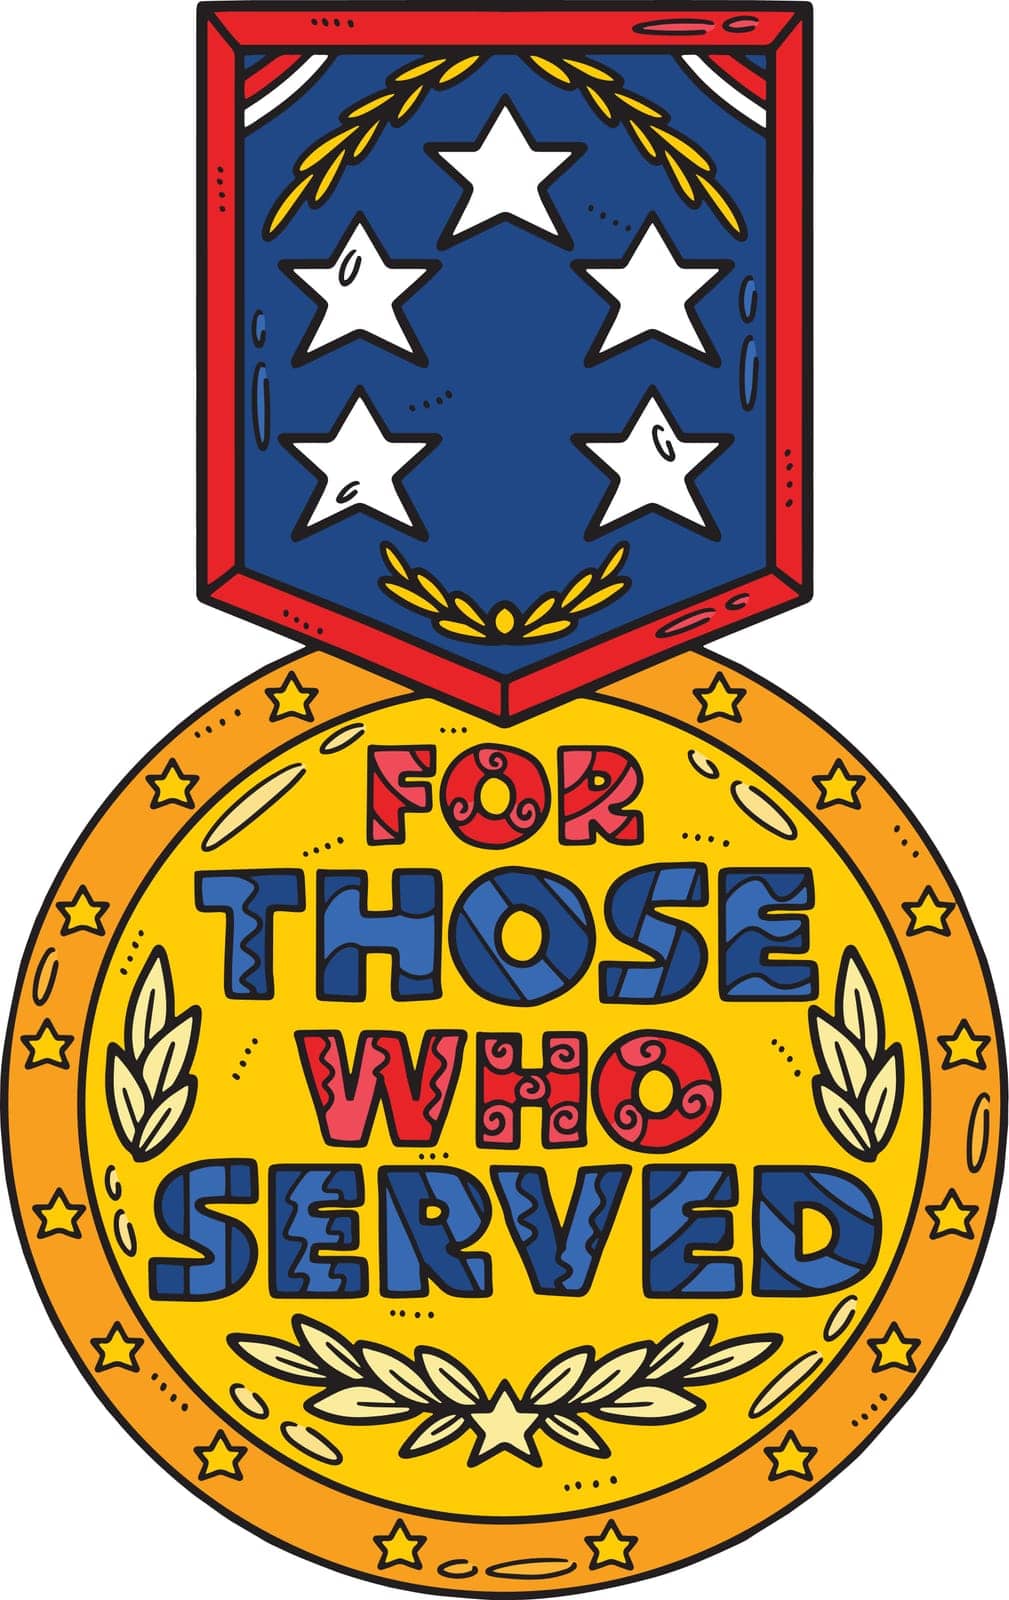 For Those Who Served Medal Cartoon Colored Clipart by abbydesign